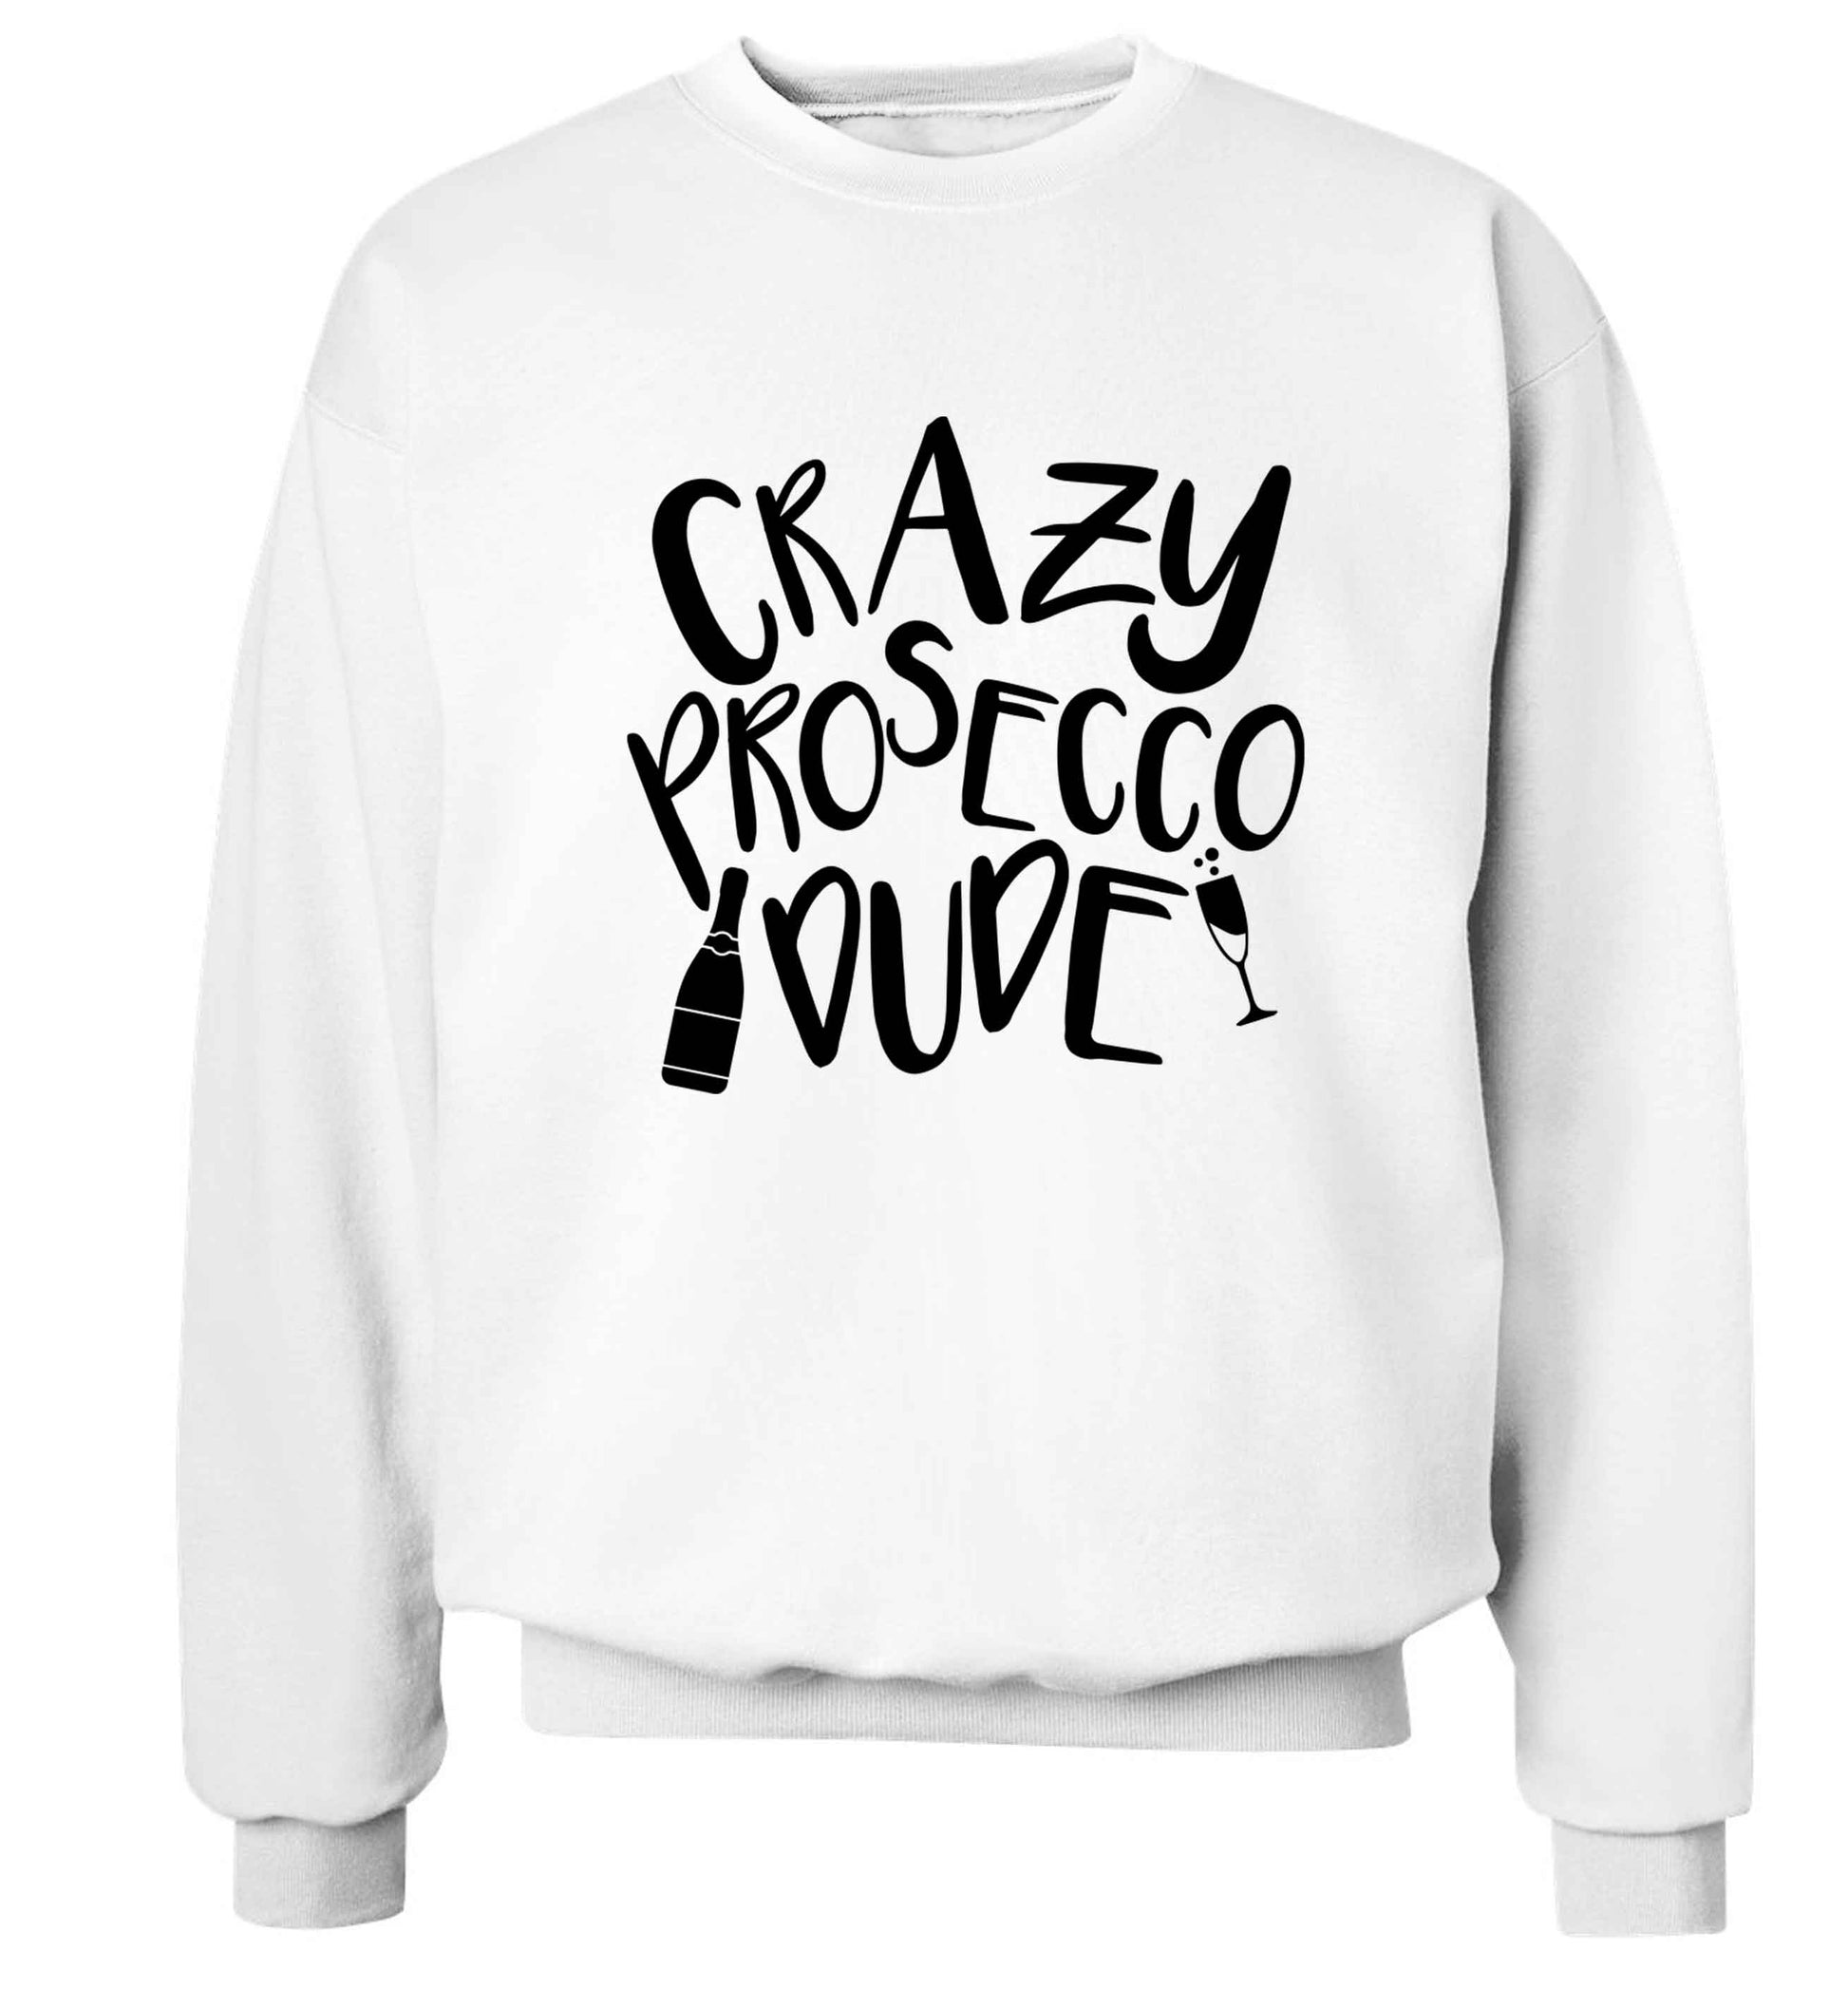 Crazy prosecco dude Adult's unisex white Sweater 2XL